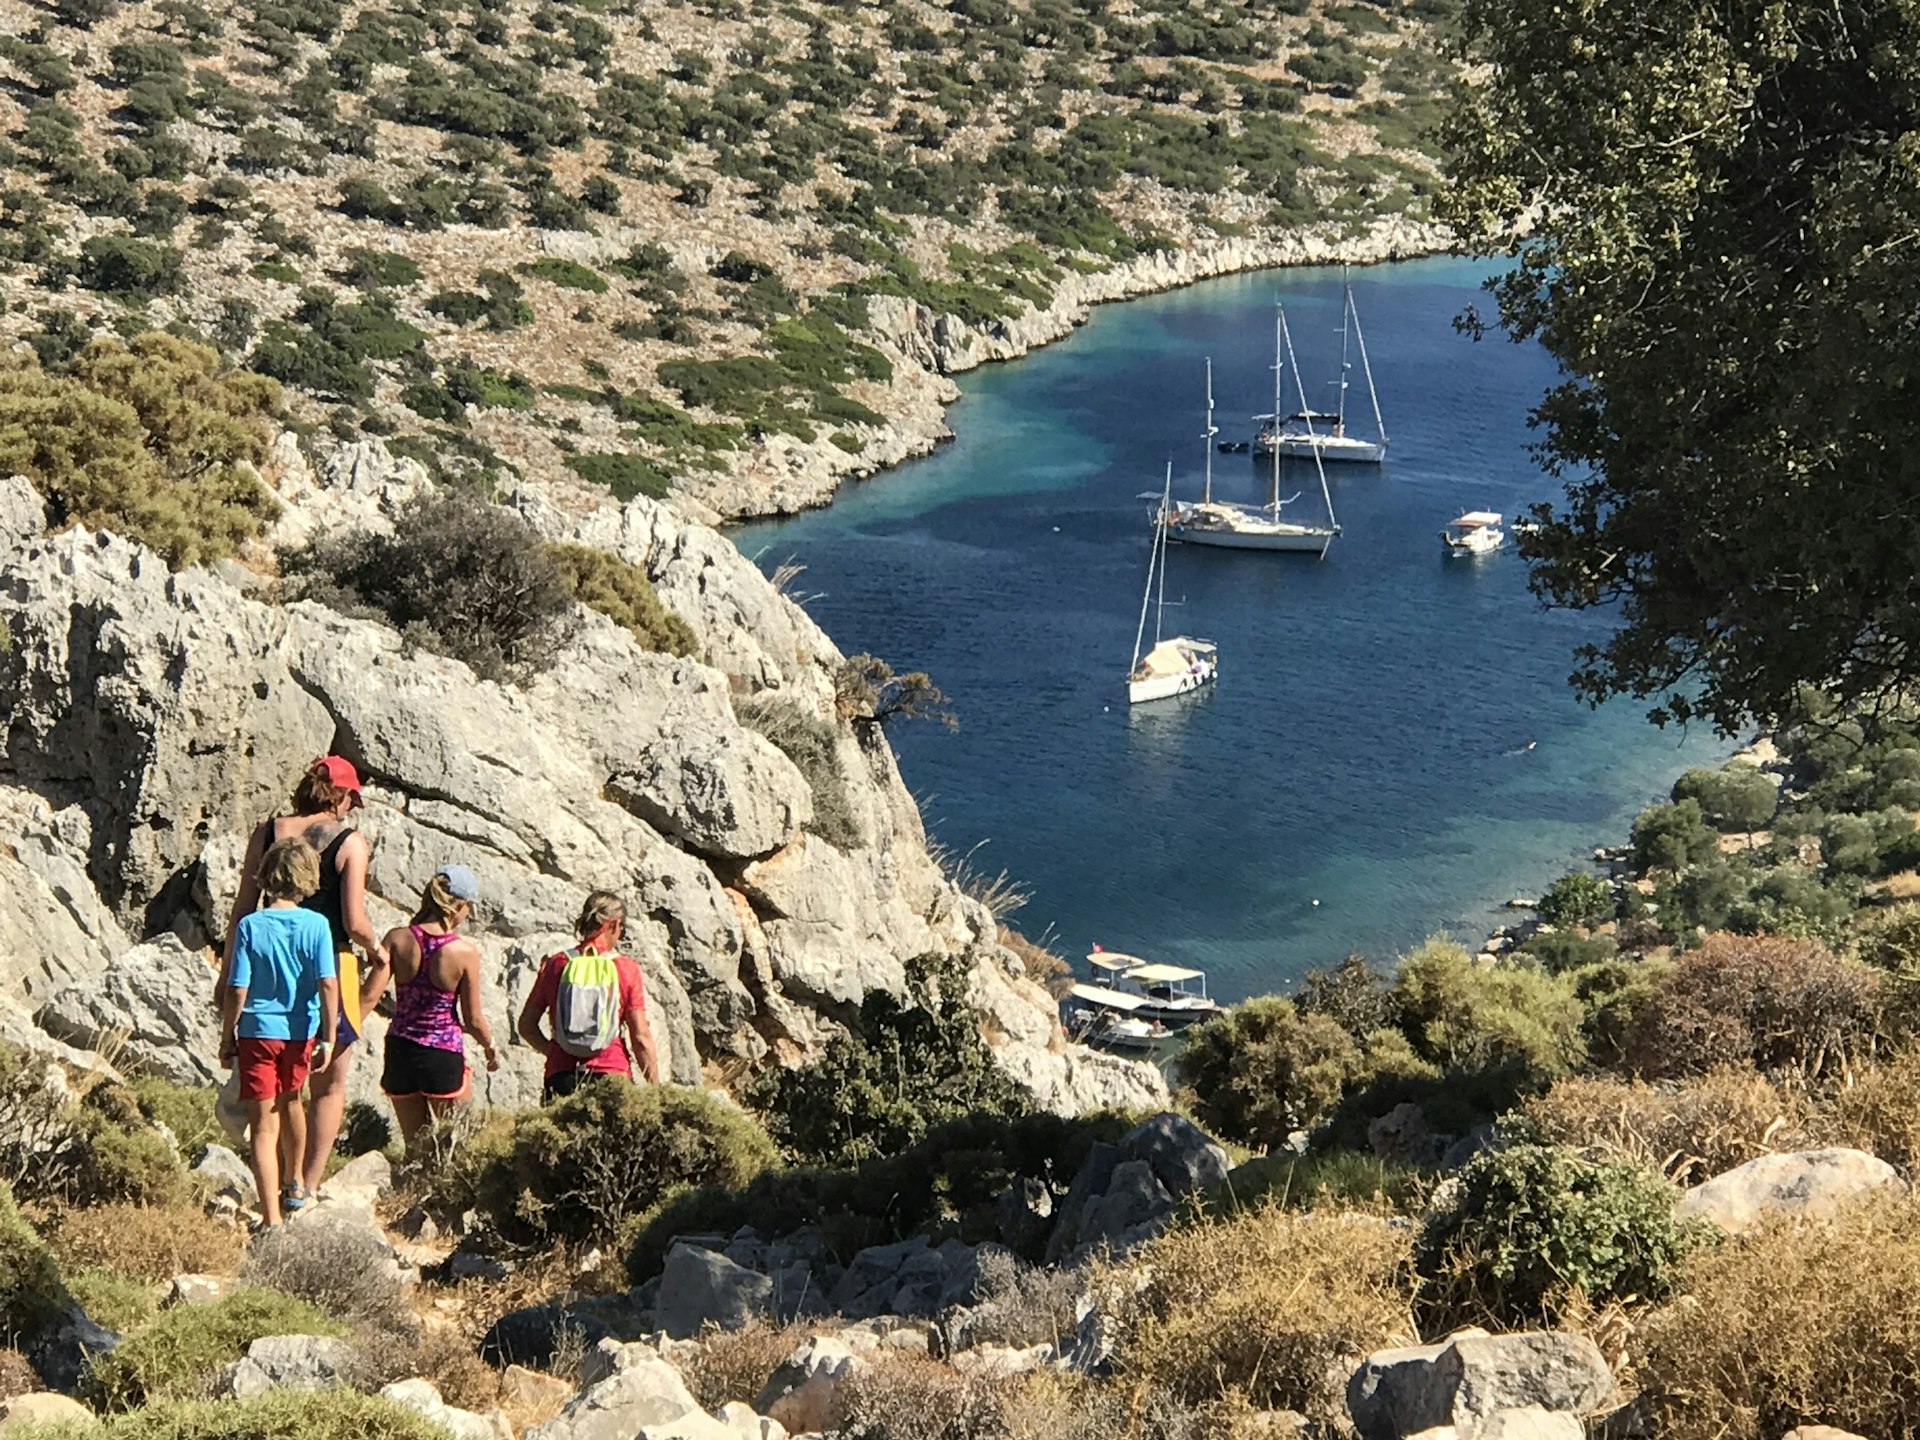 Four boats are anchored in a bay. A family walks down a rocky path towards their boat.